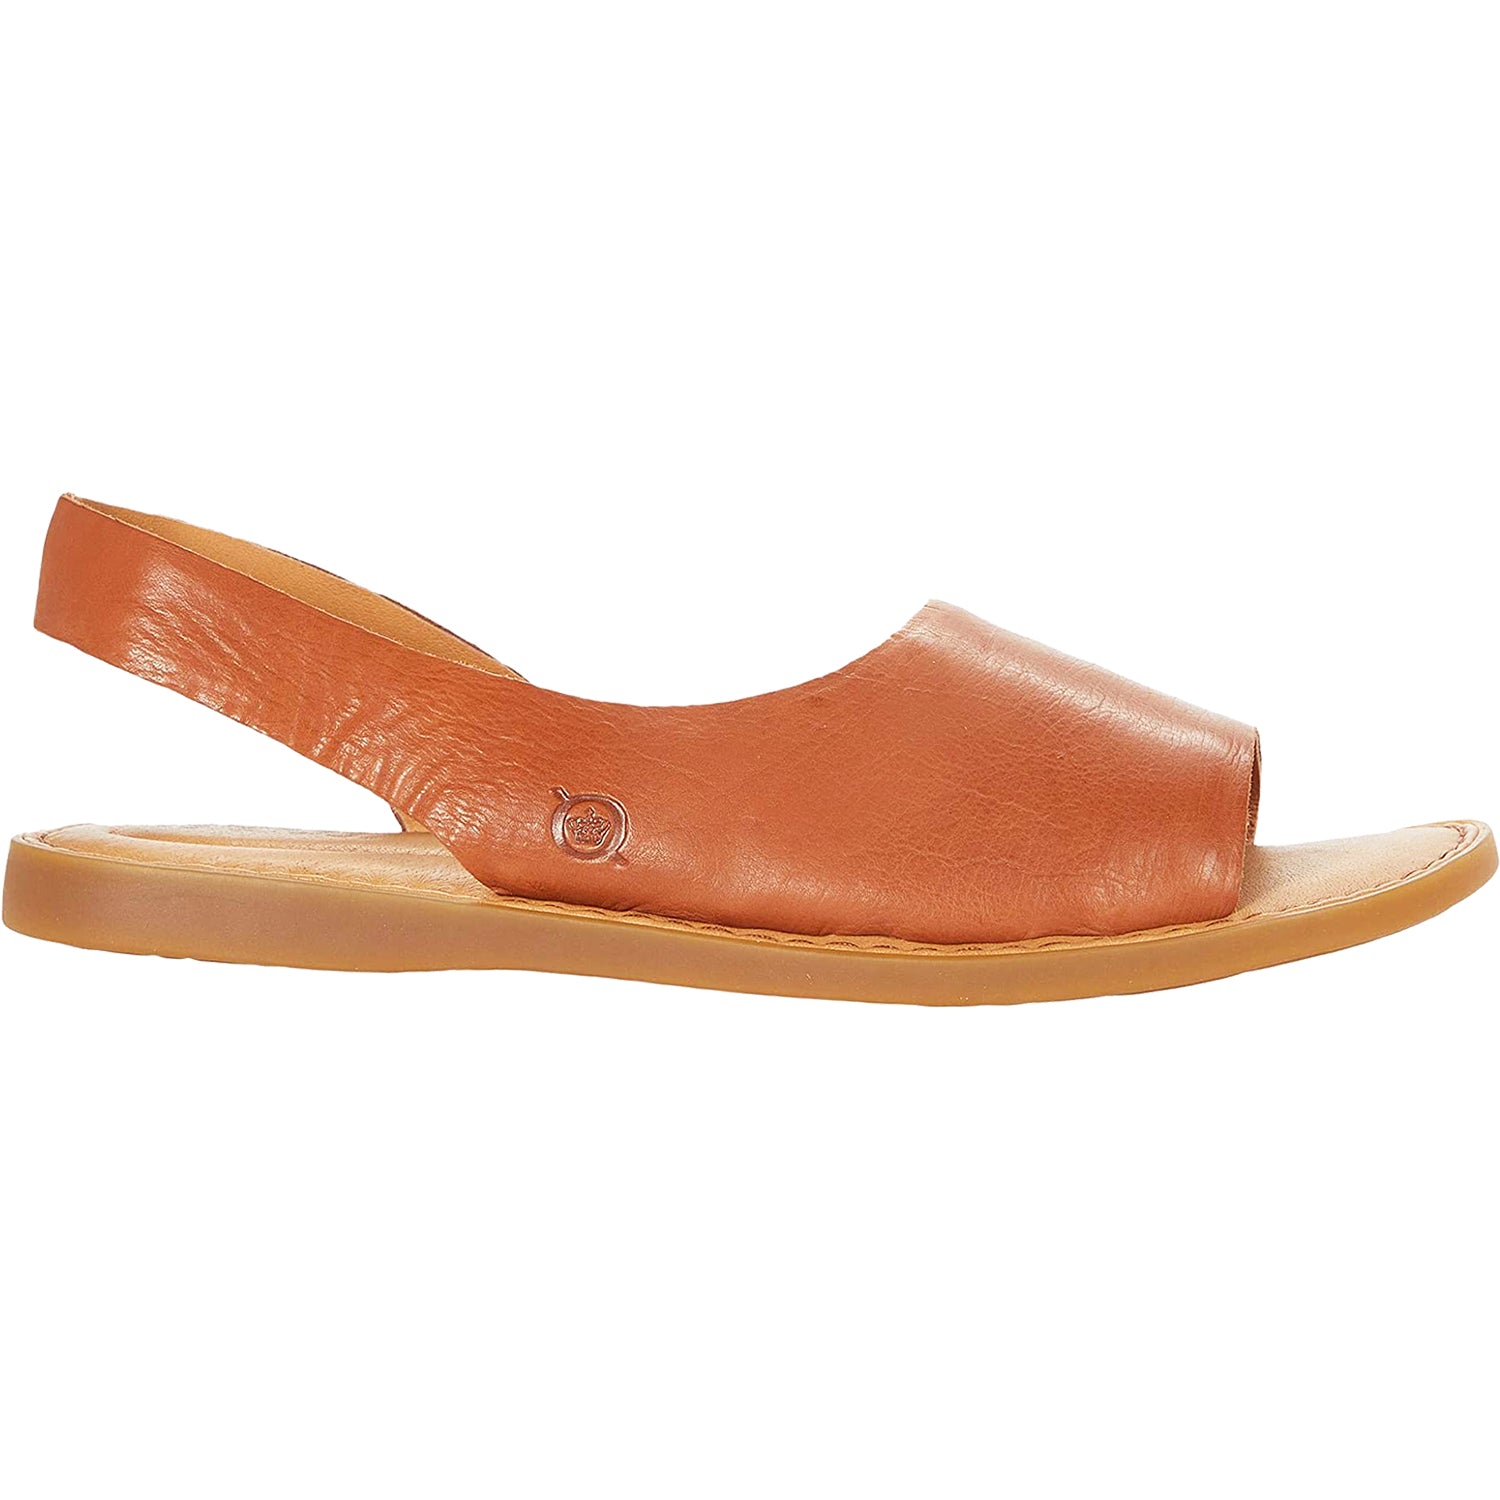 born sandals discontinued styles